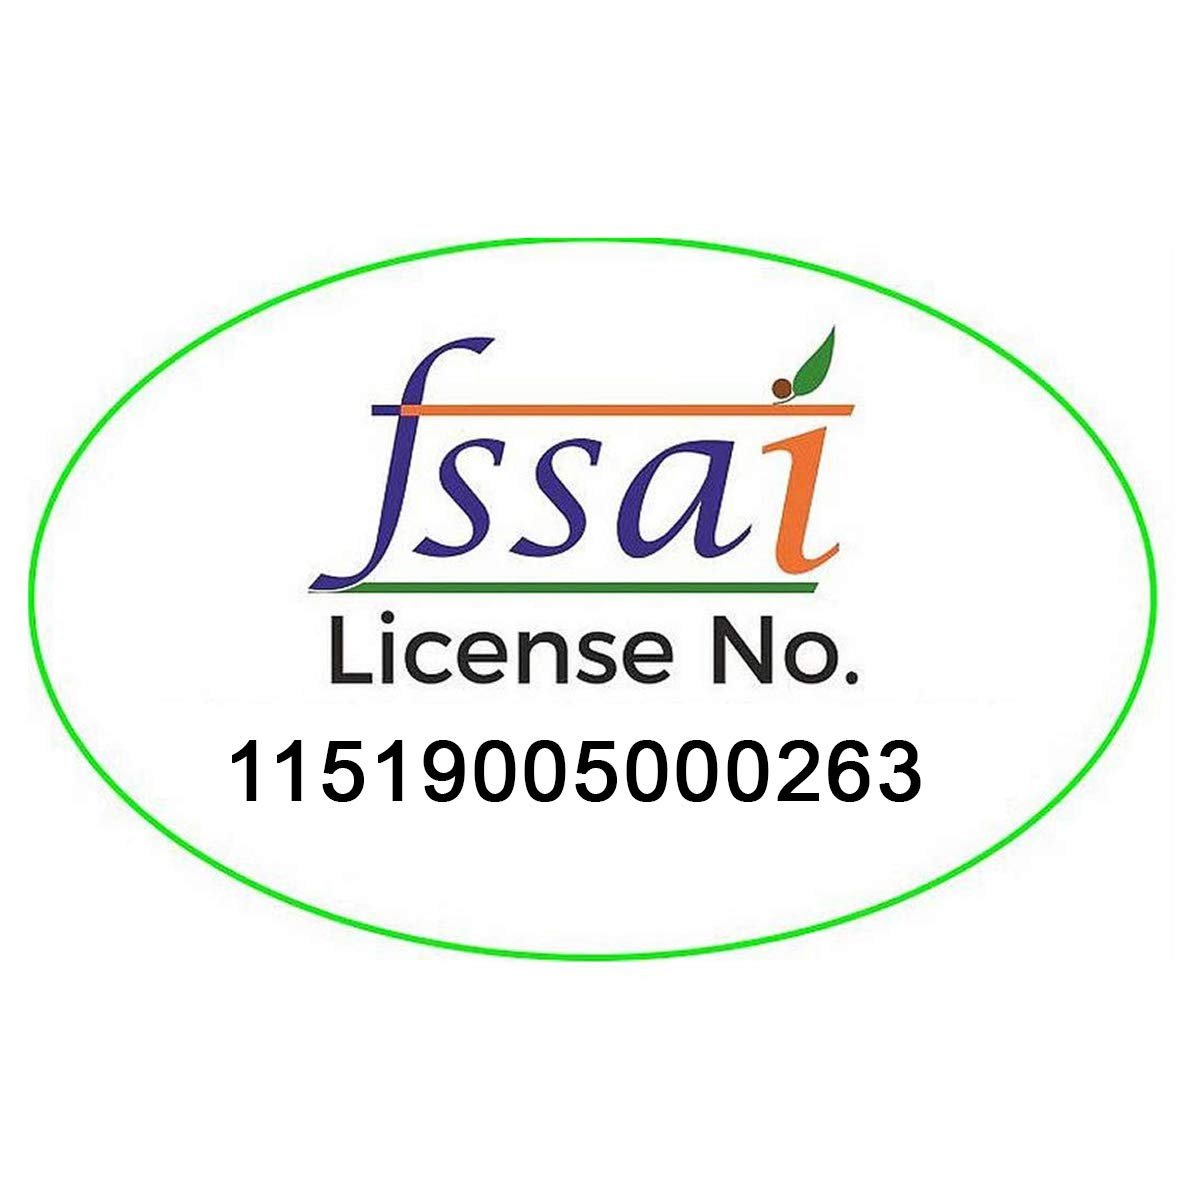 Fssai Licence No - EAT Anytime